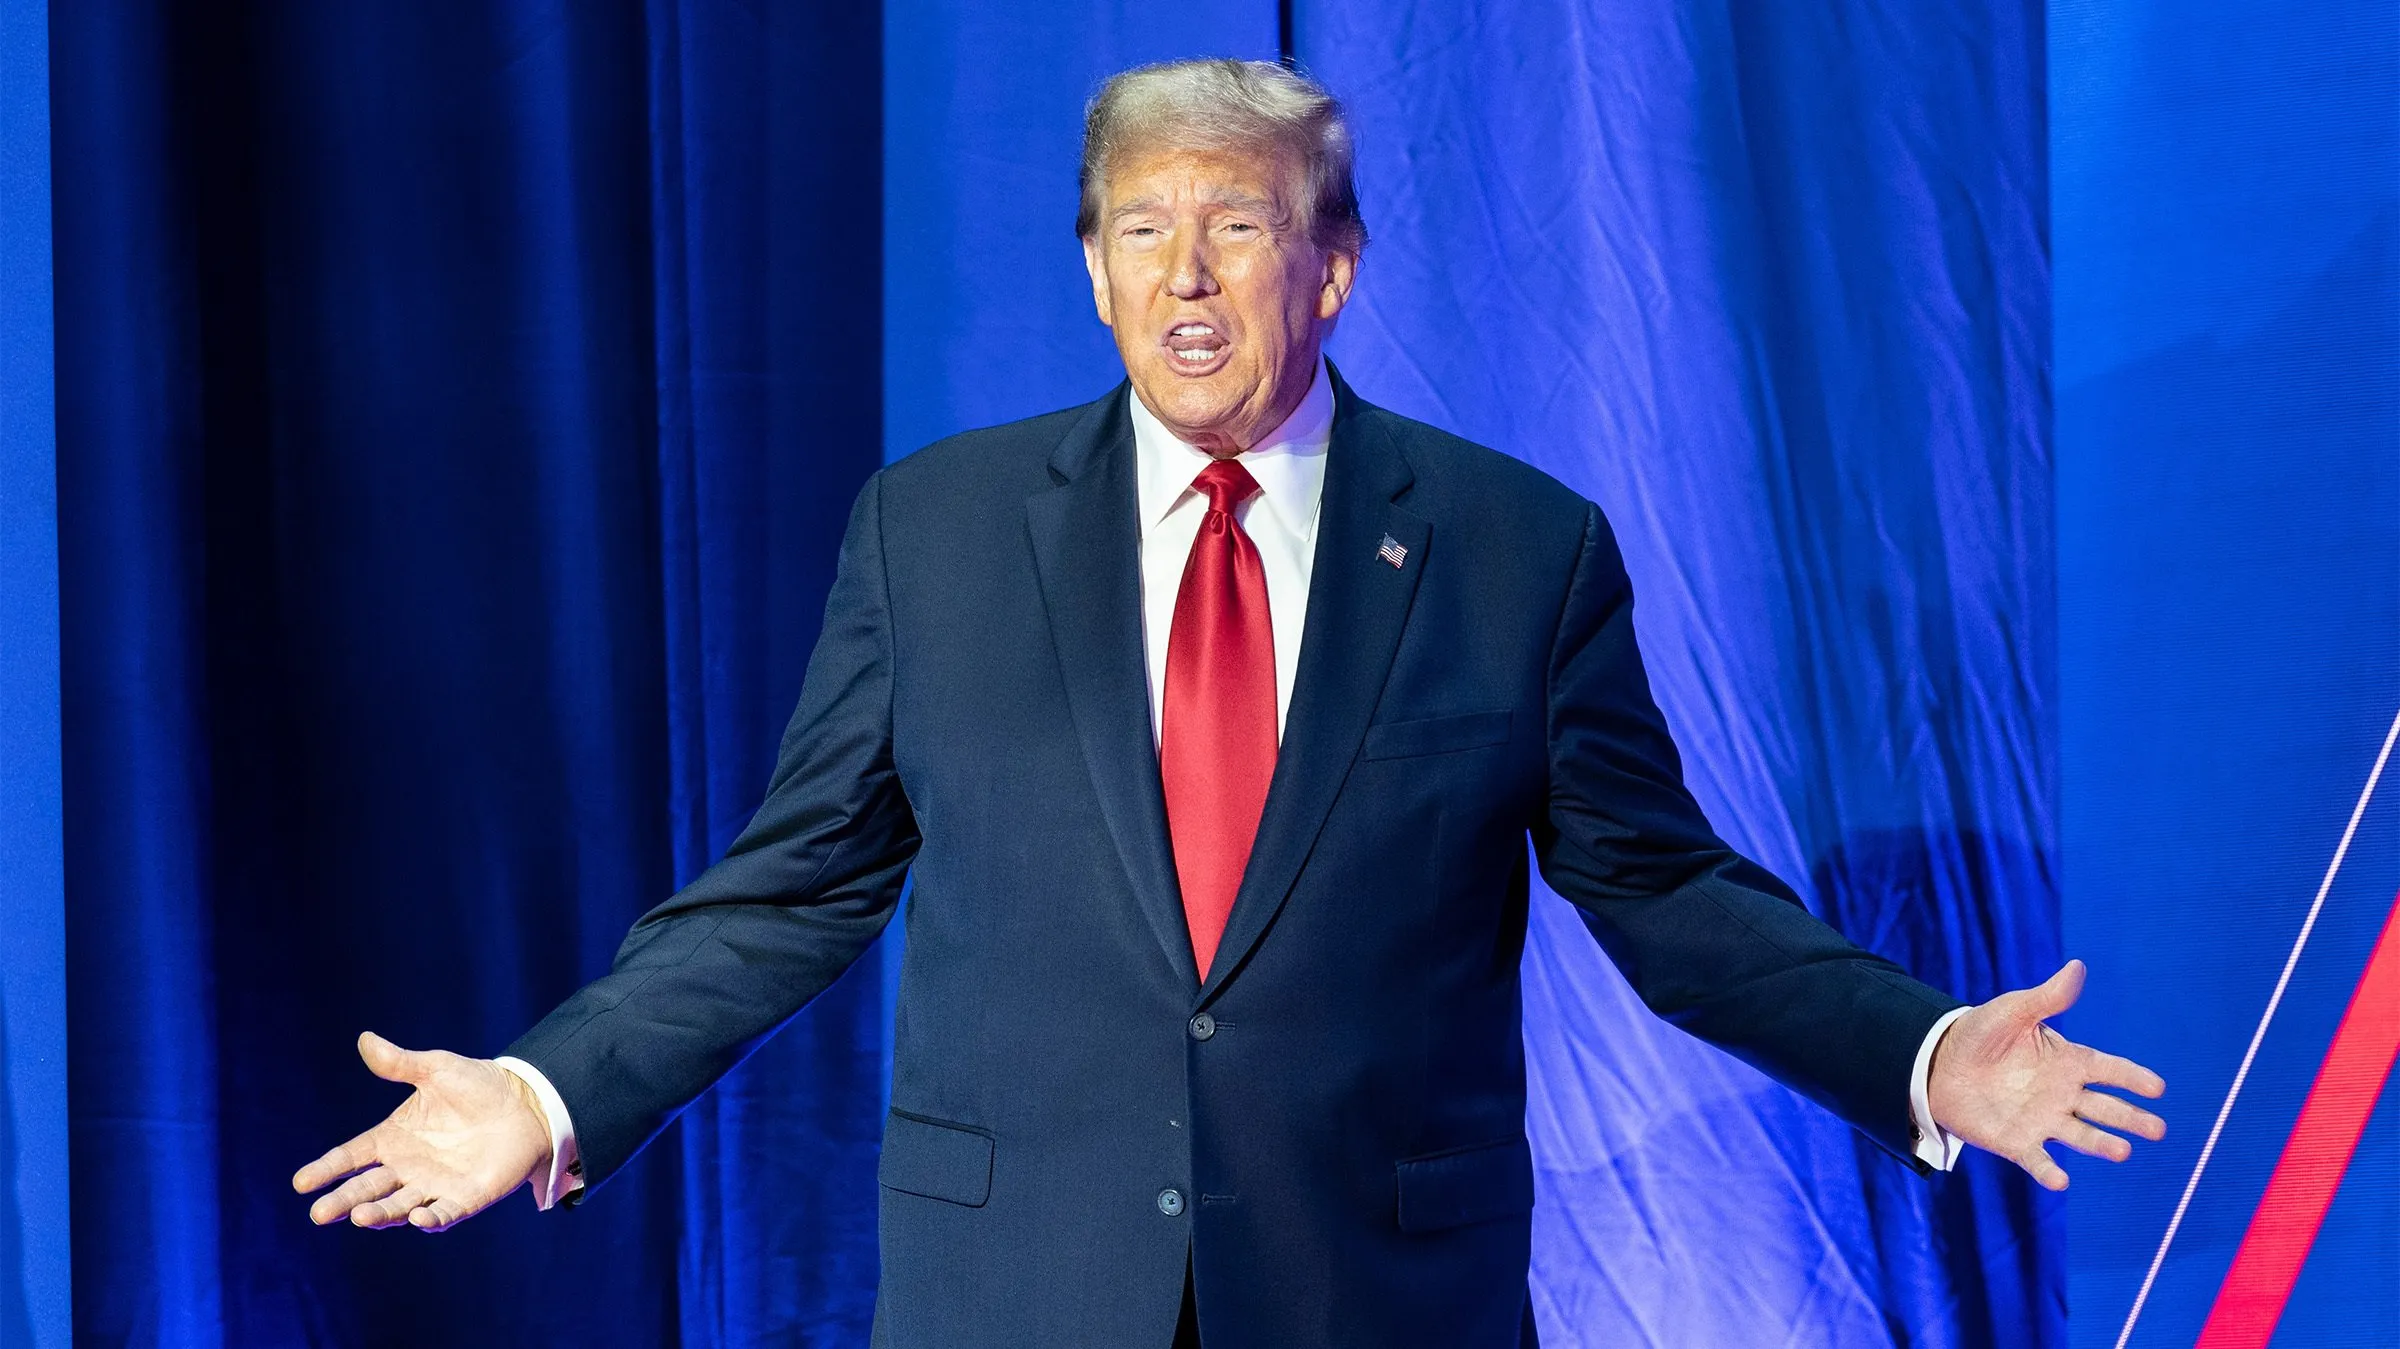 Former President Donald J. Trump at the CPAC Conference in Washington DC in February 2024. Image: Lev Radin/Shutterstock